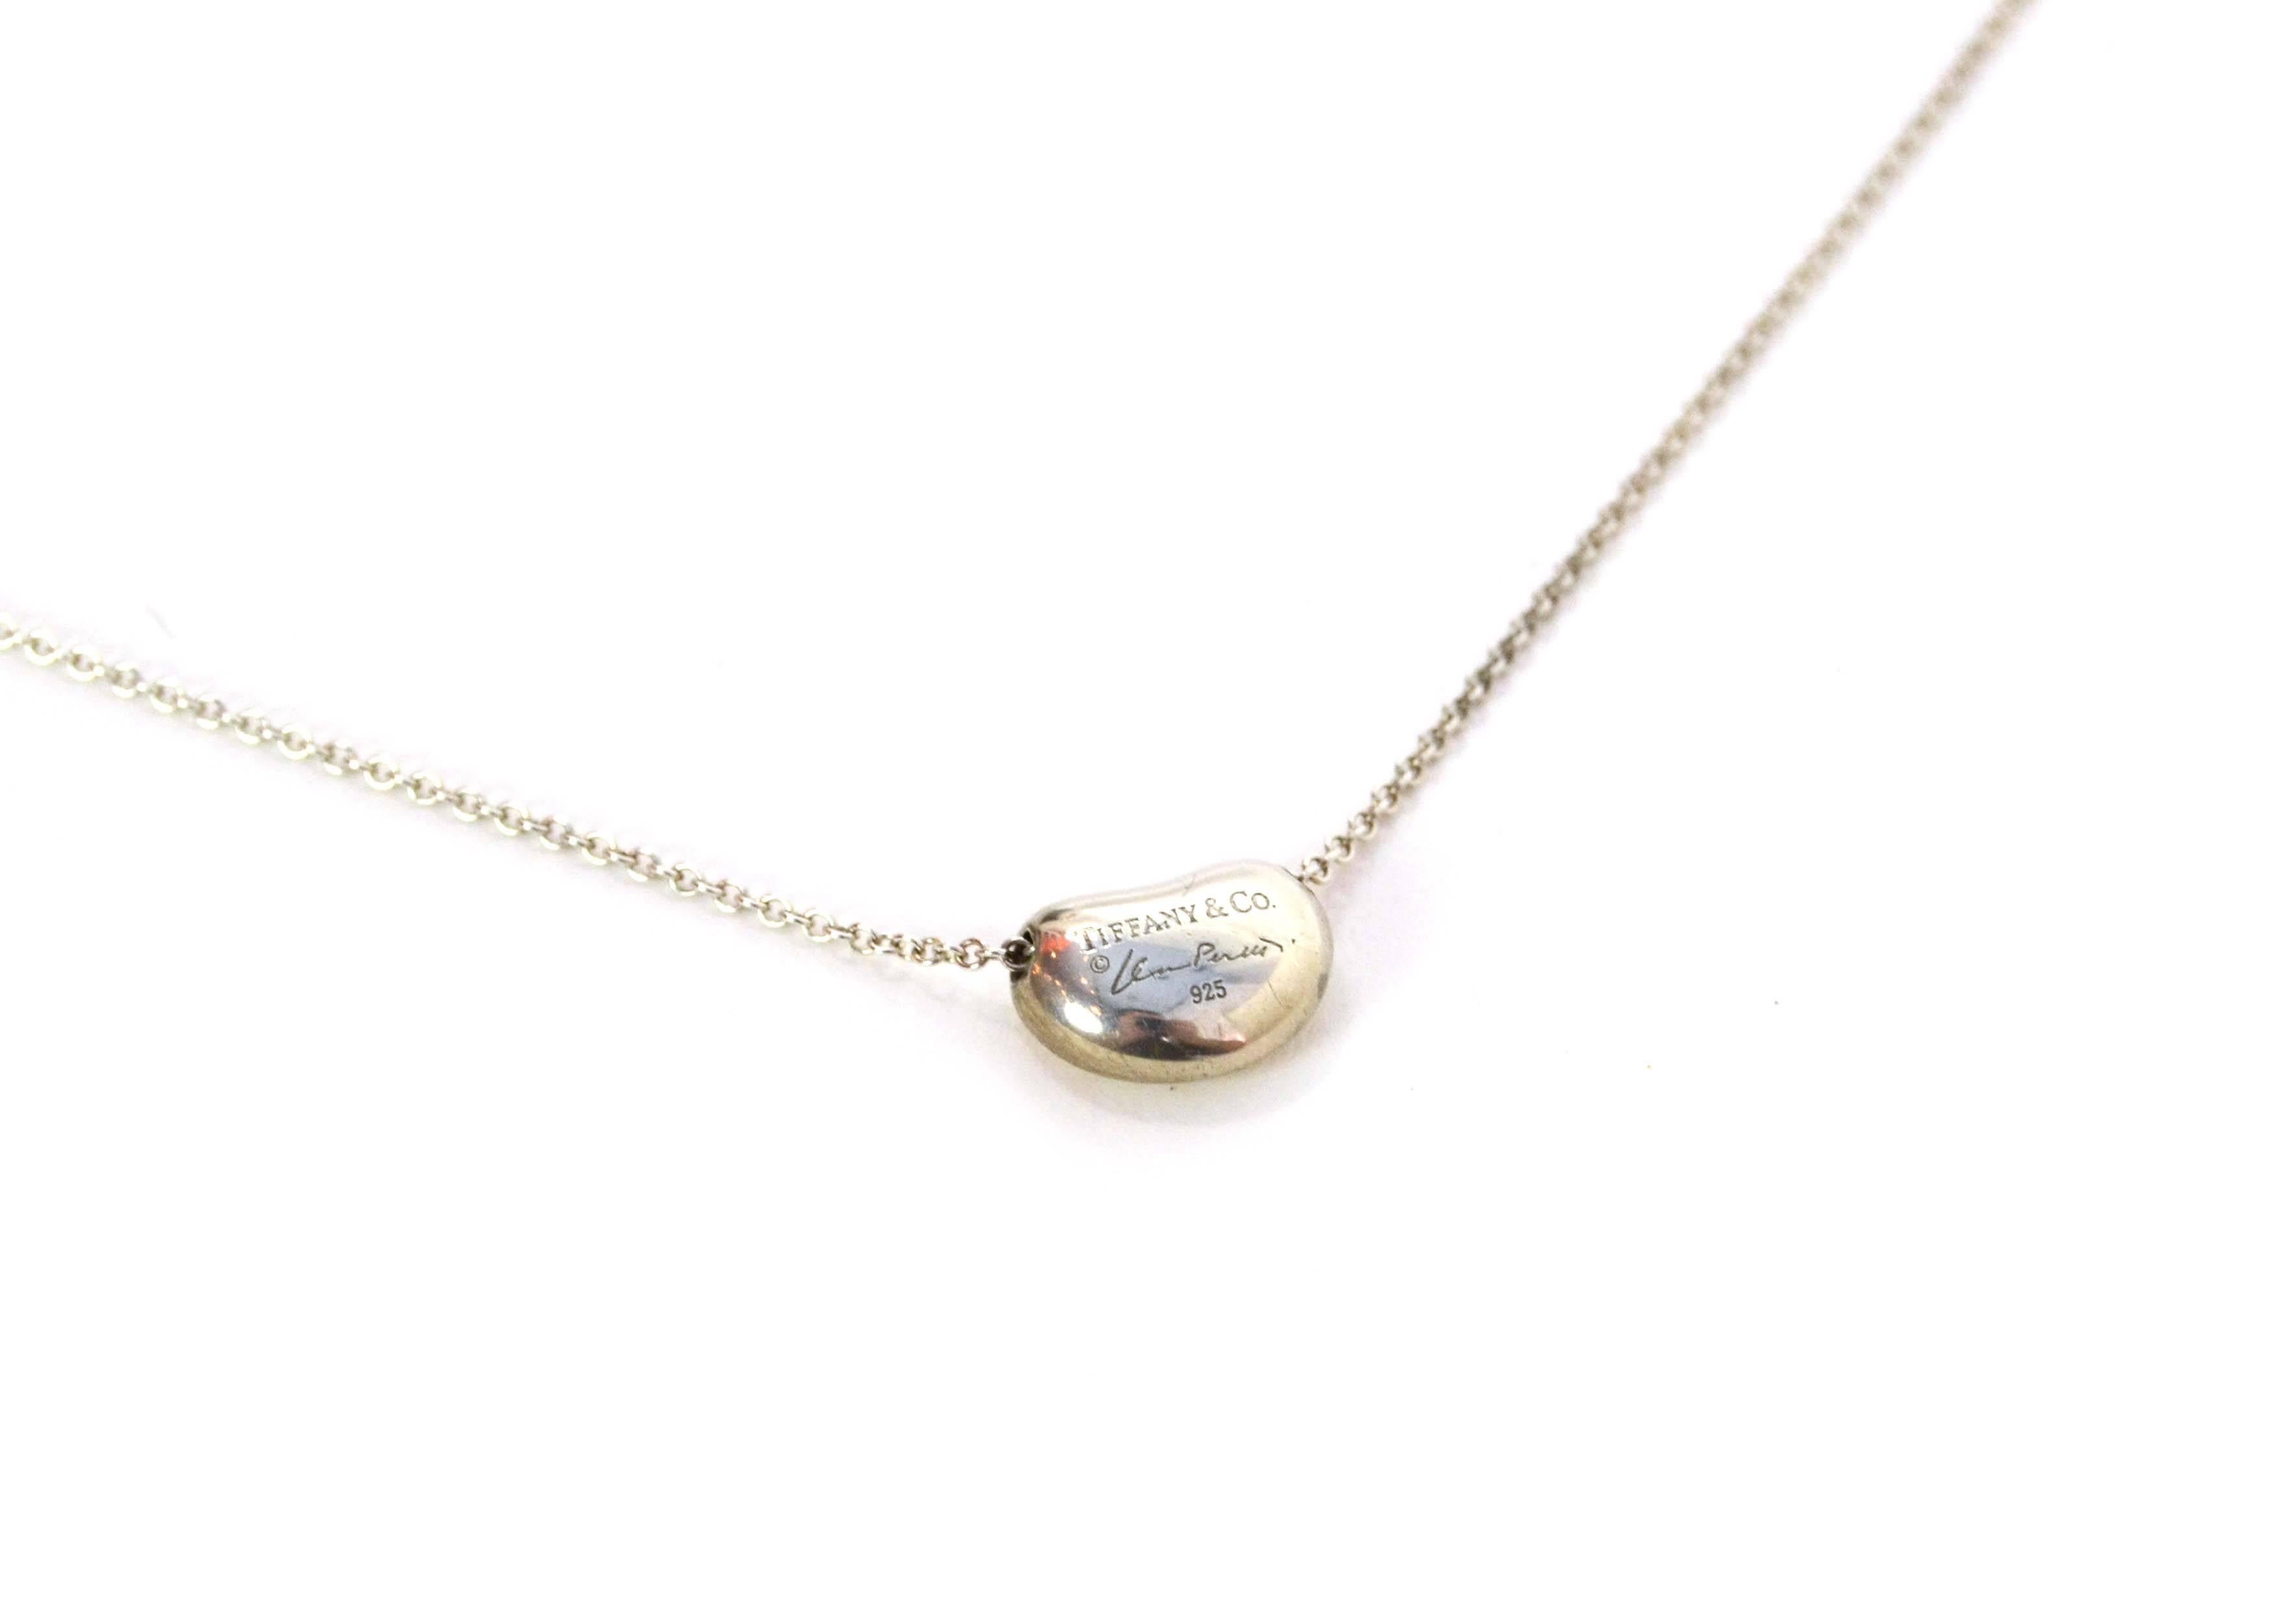 Tiffany& Co. Sterling Silver Elsa Peretti Bean Necklace

Made In: USA
Color: Silvertone
Materials: Sterling silver
Stamp: Tiffany & Co Elsa Peretti 925
Overall Condition: Excellent pre-owned condition with the exception of some light scratches